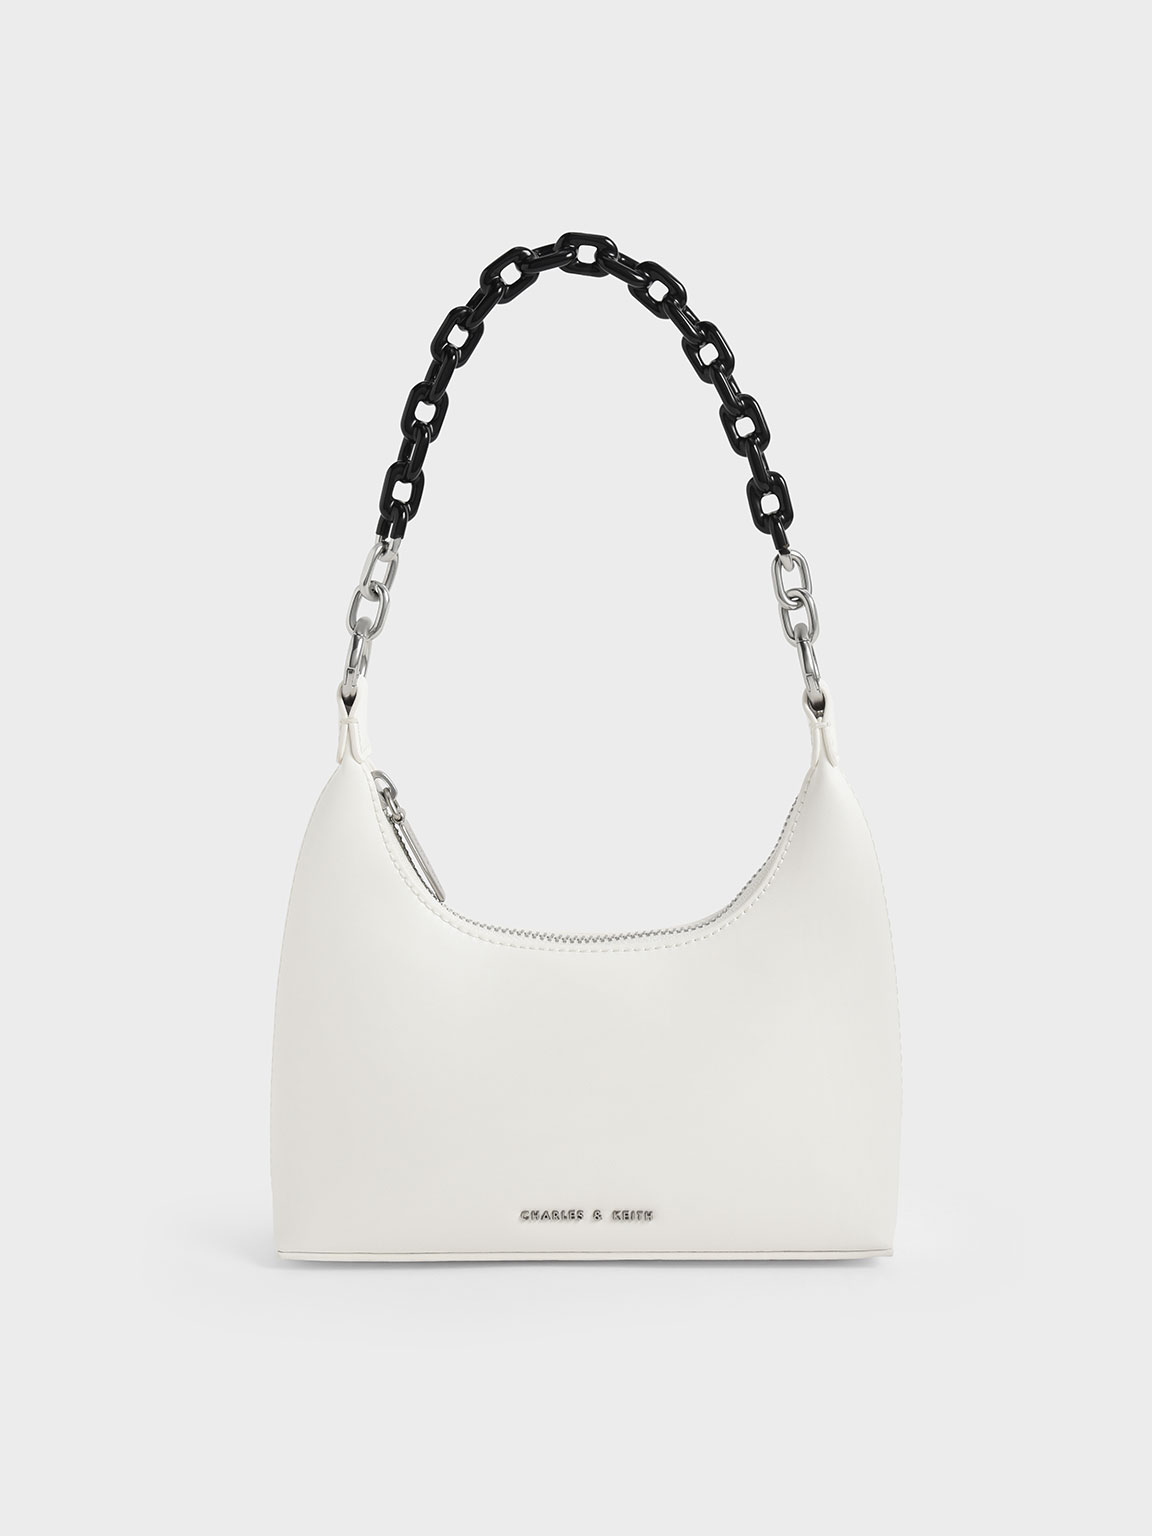 Must-Have Bags  Chain Straps & Ruched Handles - CHARLES & KEITH  International